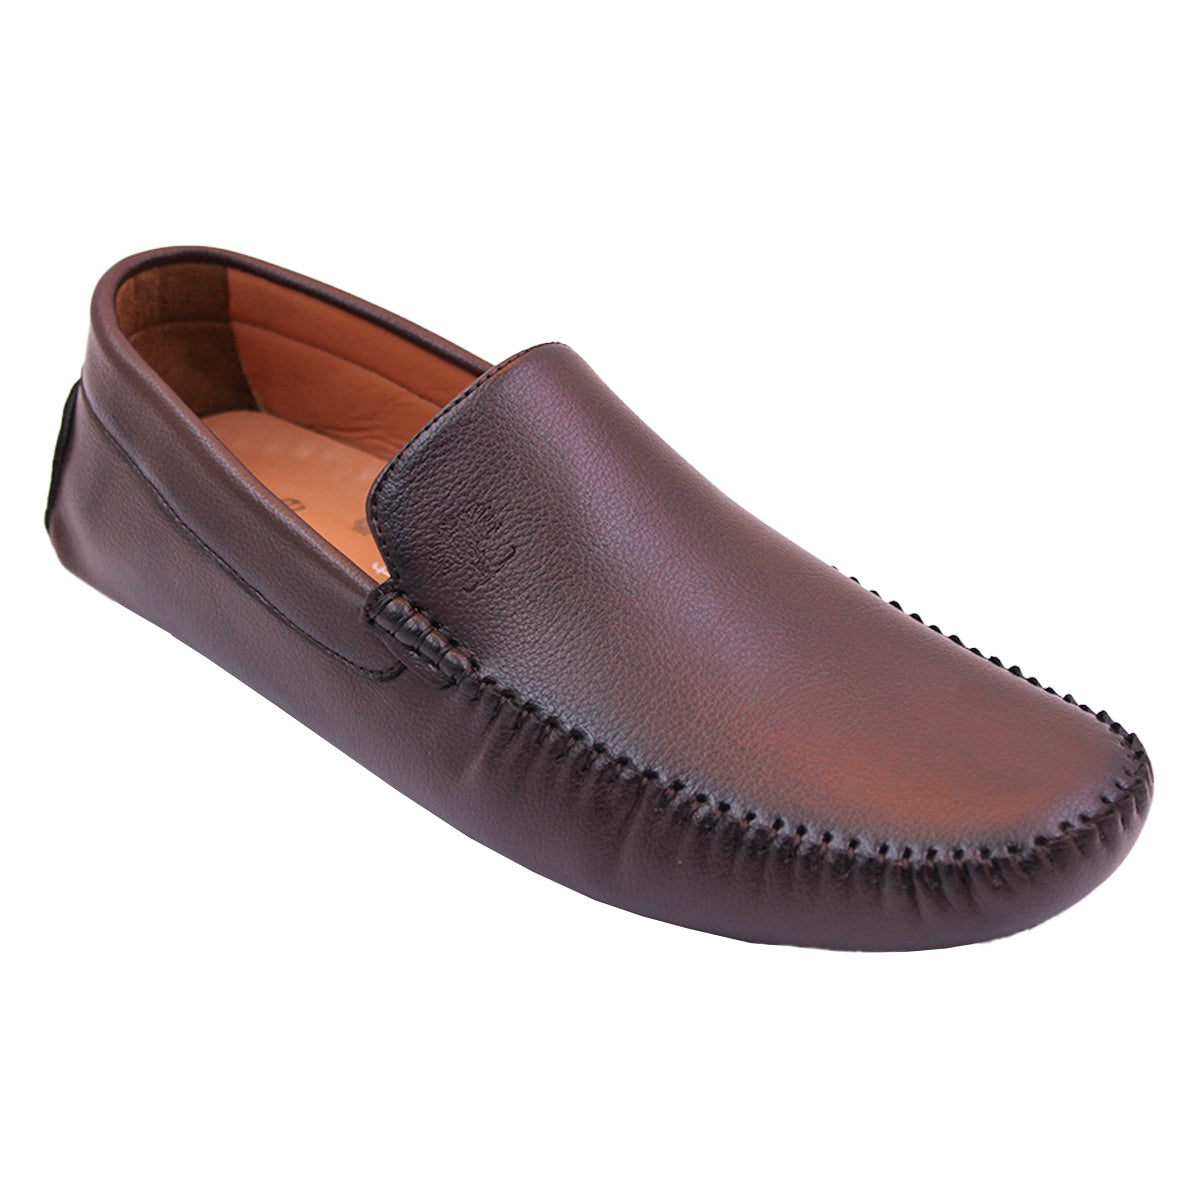 Mens Flats Pumps Slip On Loafers Faux Leather Shoes Driving Moccasins Soft  Comfy